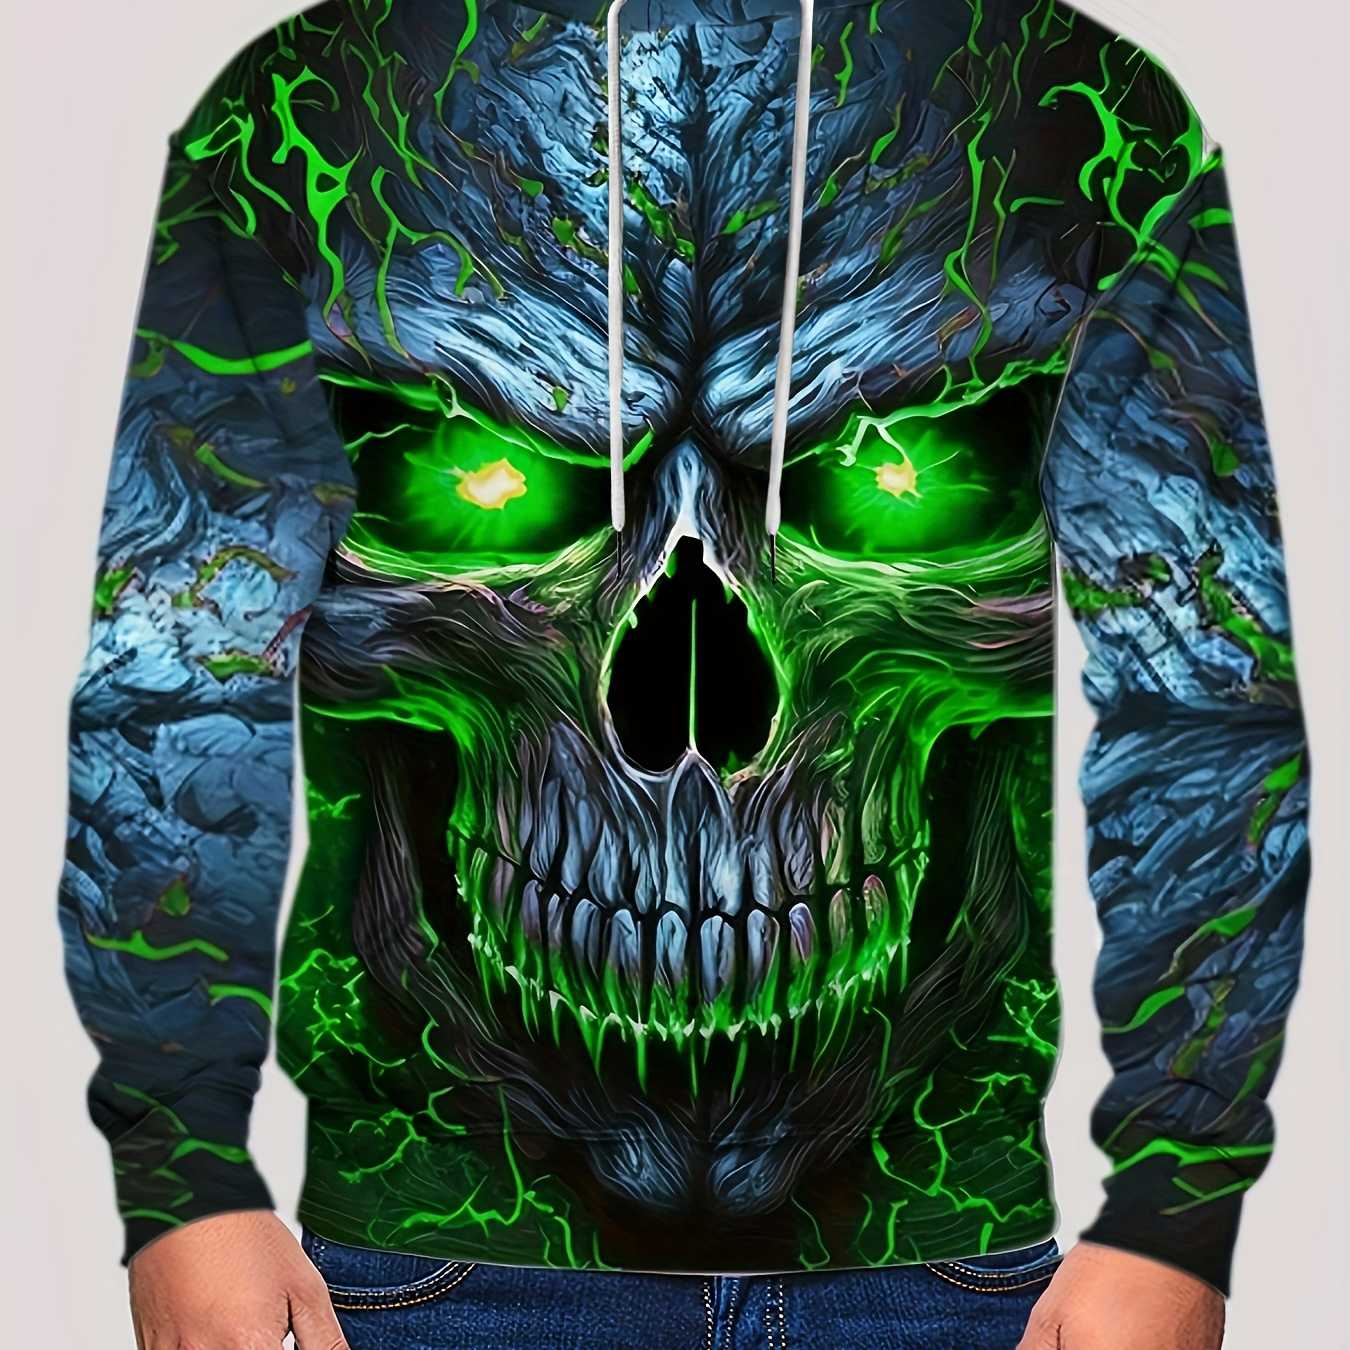 

3d Evil Skull Print Hoodie, Cool Hoodies For Men, Men's Casual Graphic Design Pullover Hooded Sweatshirt With Kangaroo Pocket Streetwear For Winter Fall, As Gifts